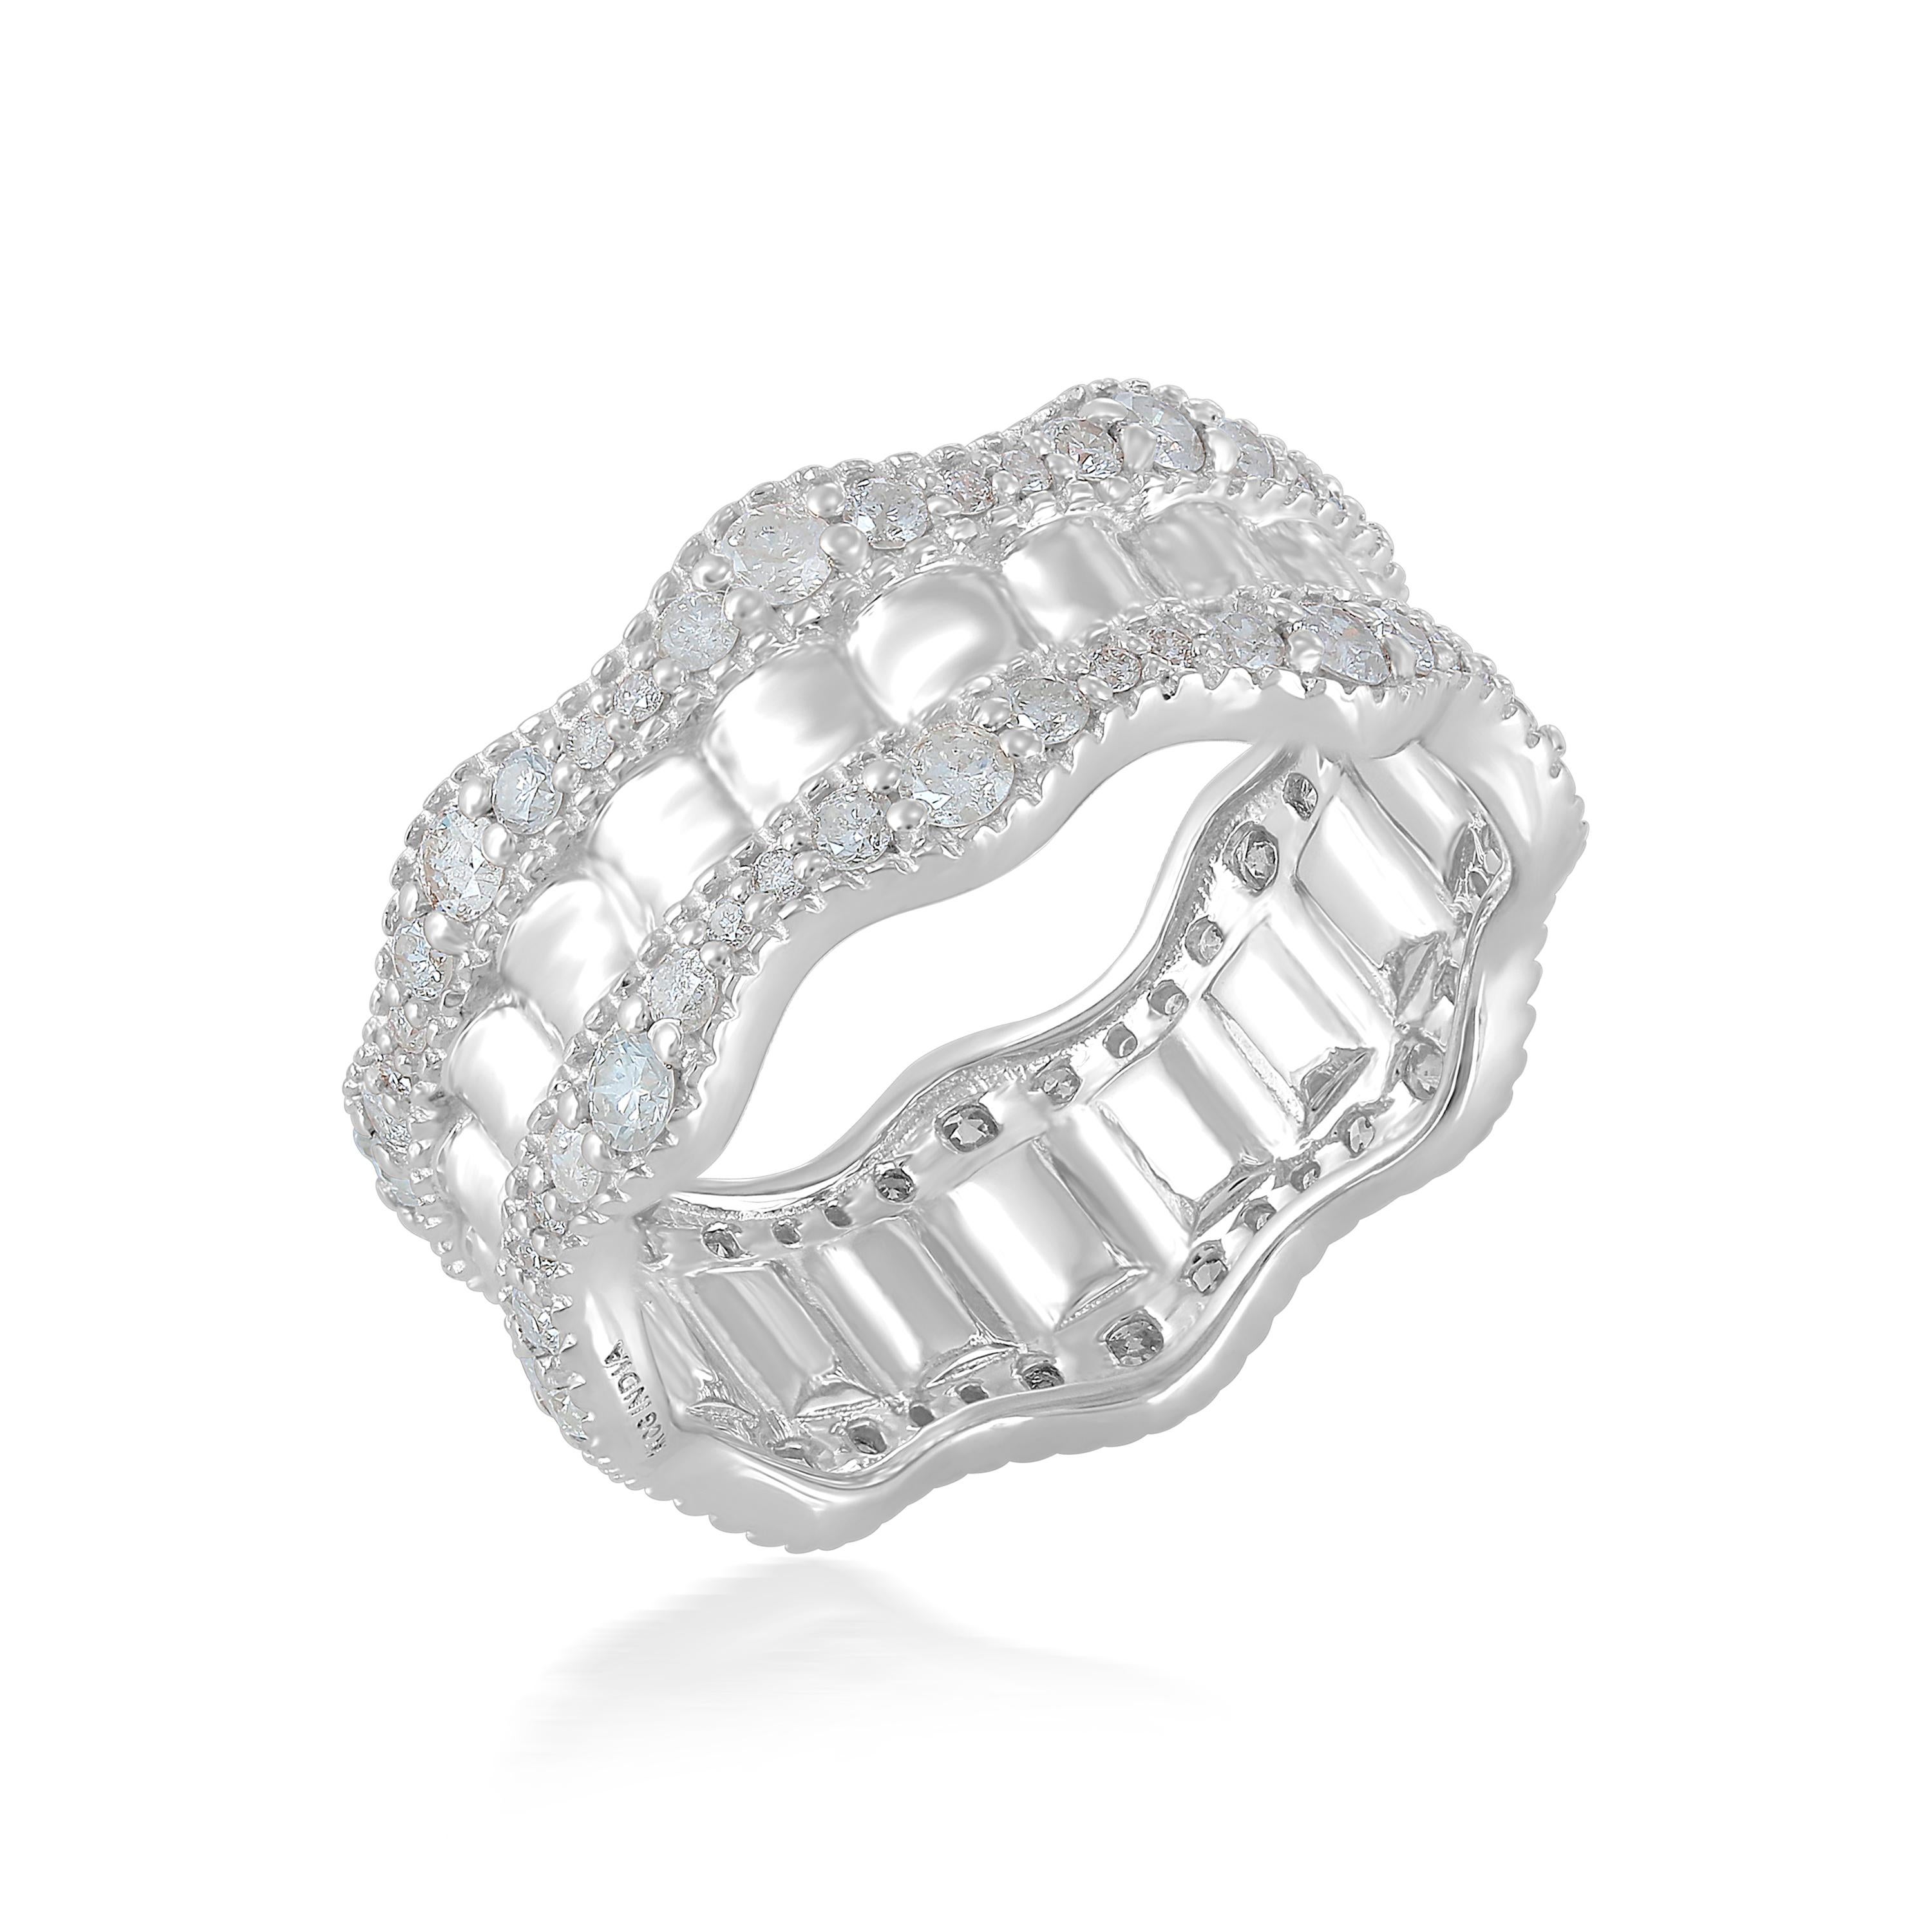 Round Cut Gemisty 1.22cttw. Diamond Eternity Band Ring in 925 Sterling Silver For Sale